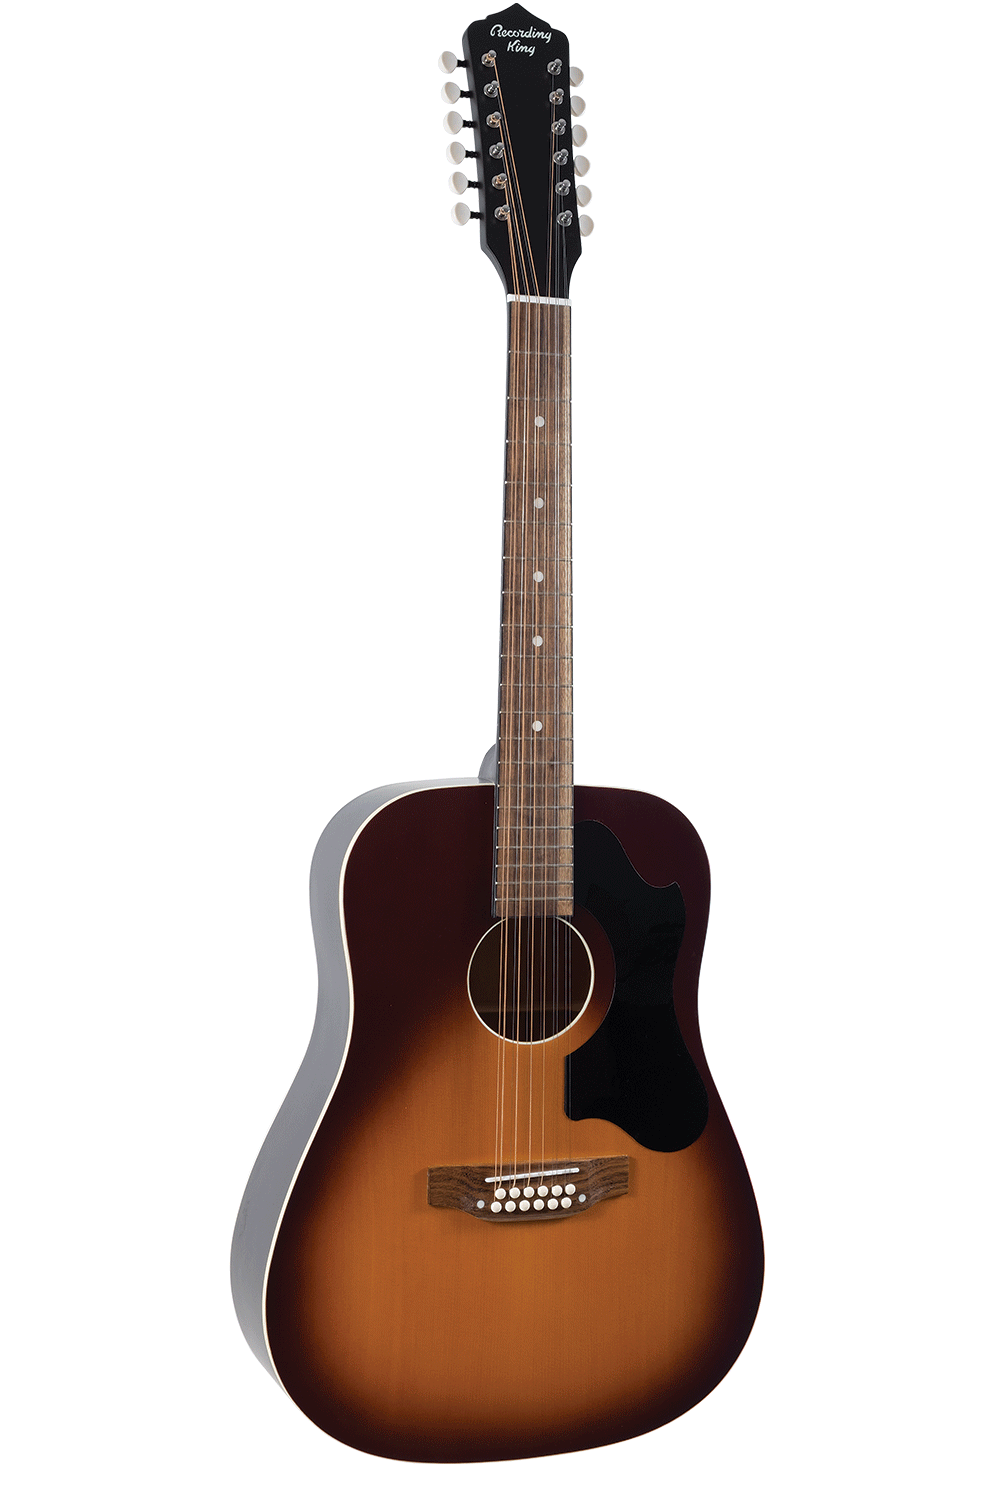 Dirty 30s Series 9 12-String